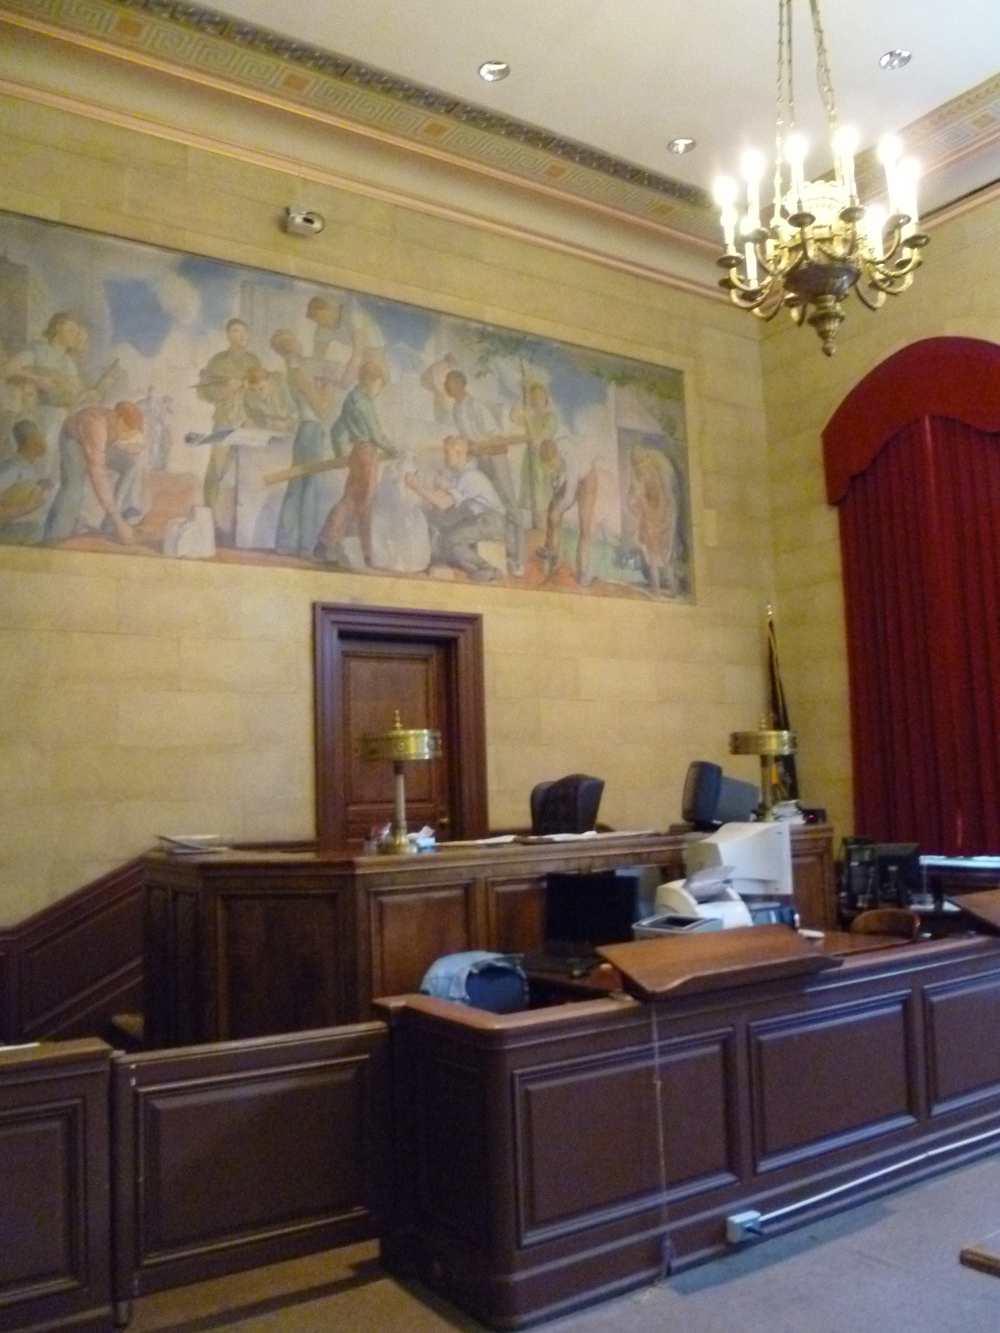 PWA murals are found in courtrooms and other public spaces in the Family Court building.